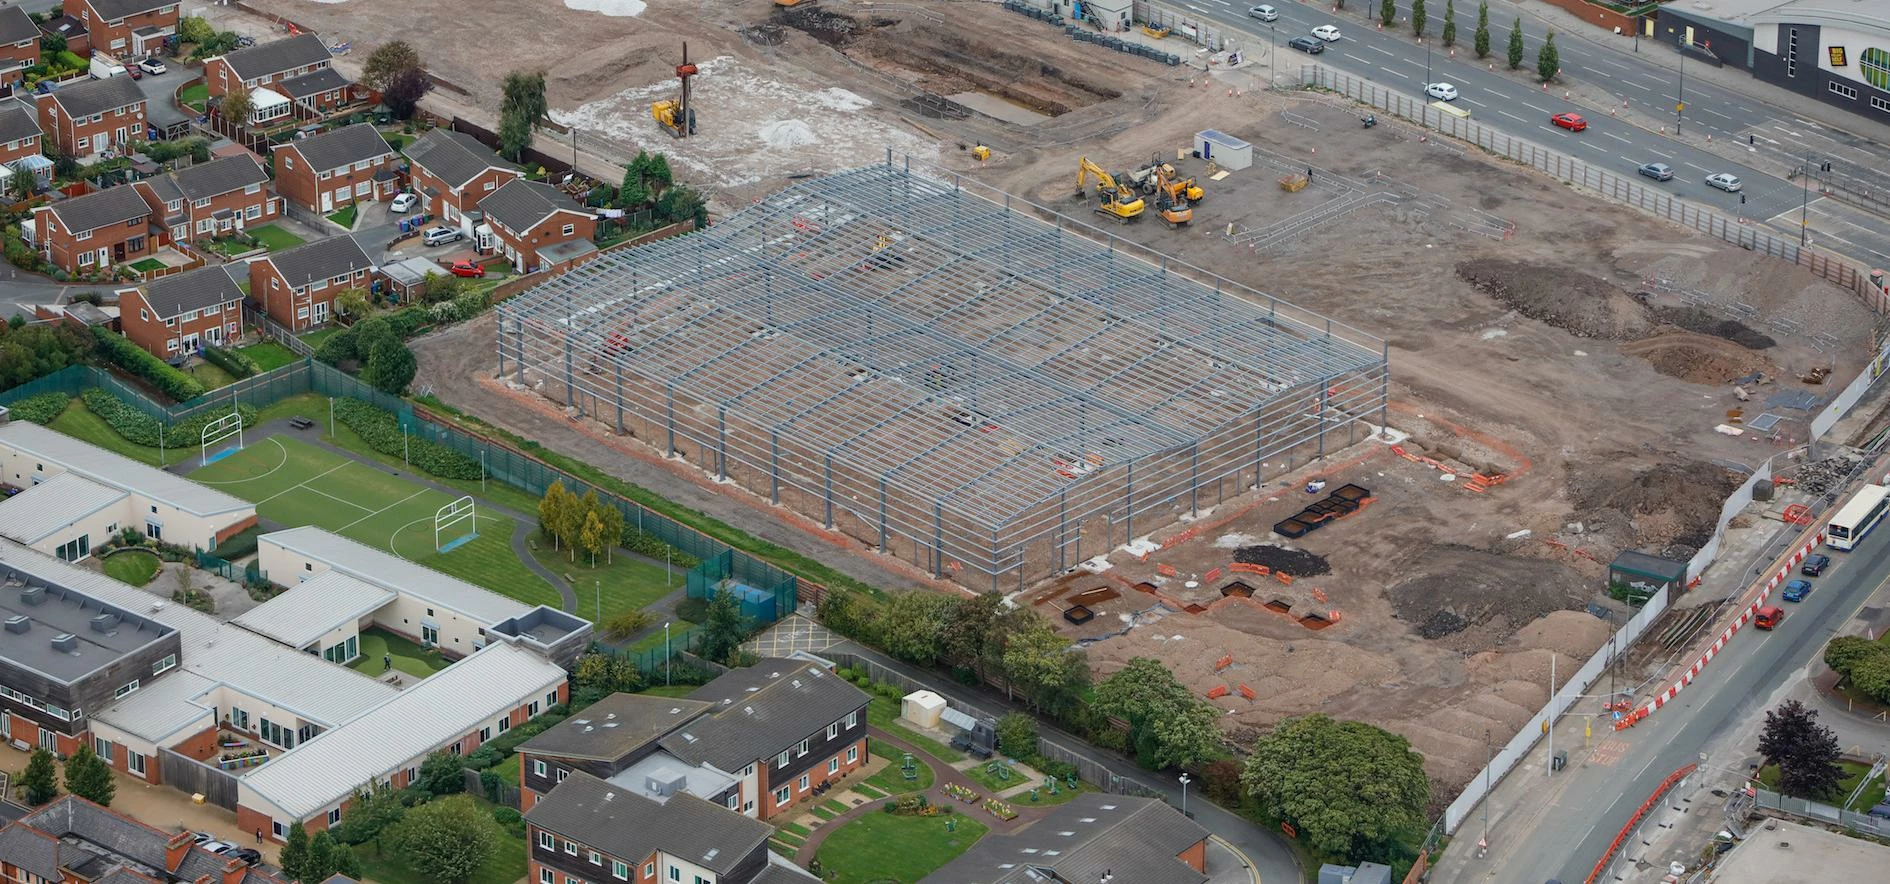 An aerial view of the works in progress off Edge Lane